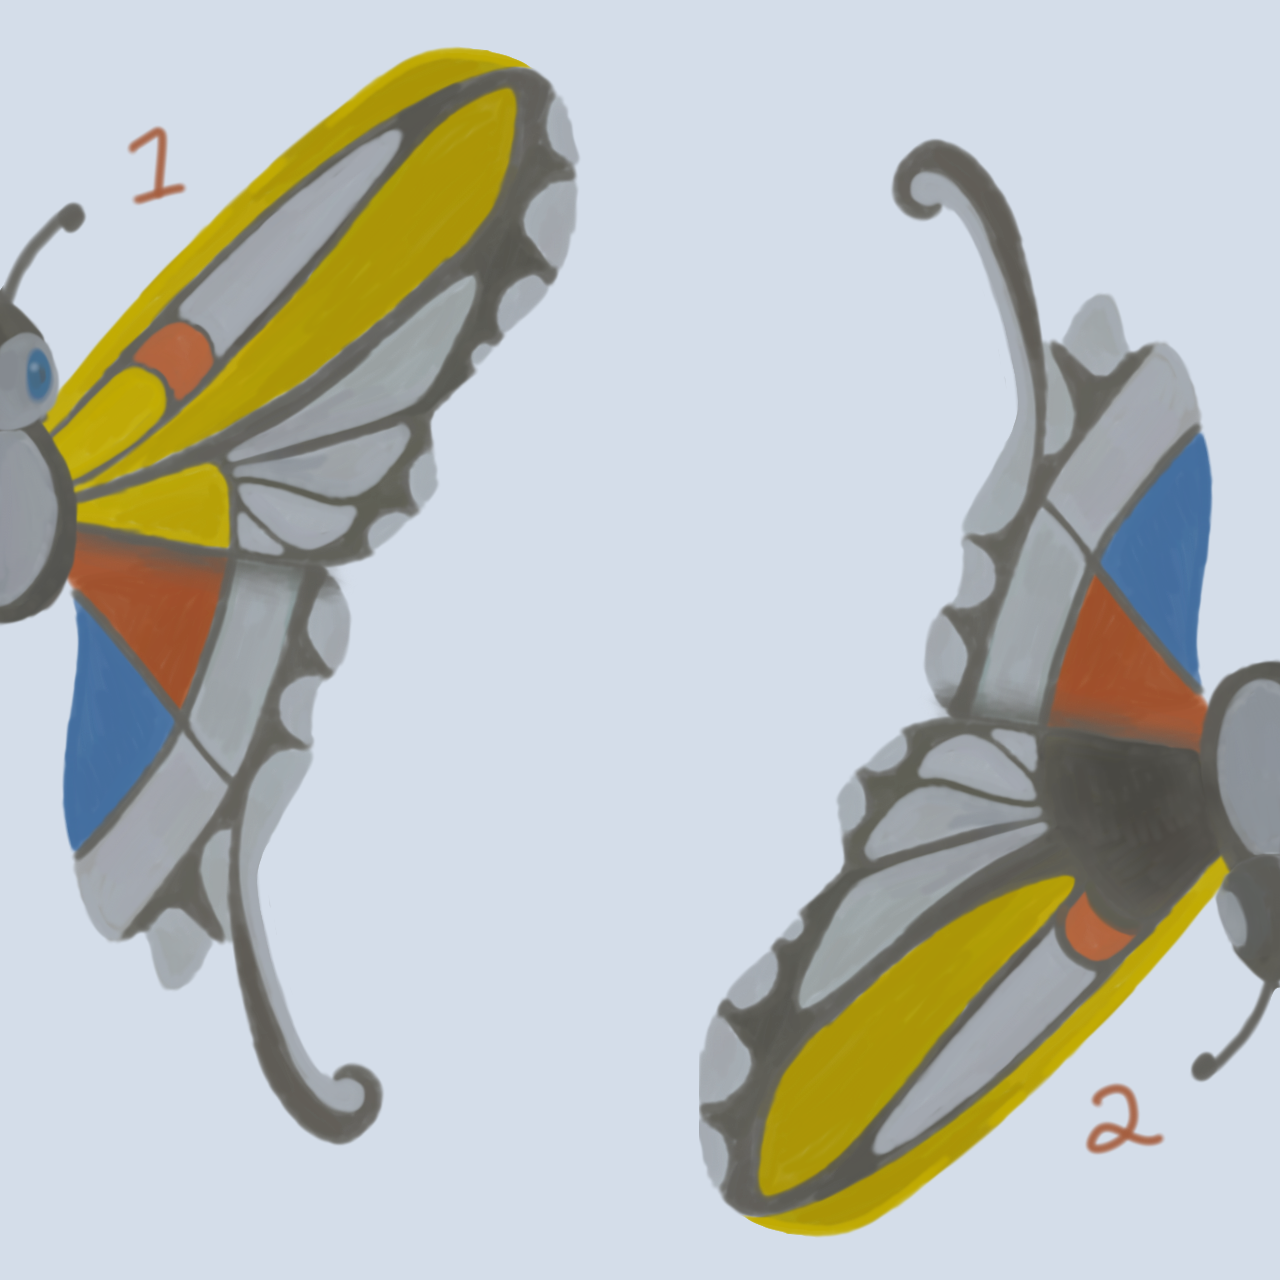 An illustration of the Pokemon Beautifly in a slightly more realistic style, resembling the common yellow swallowtail butterfly.